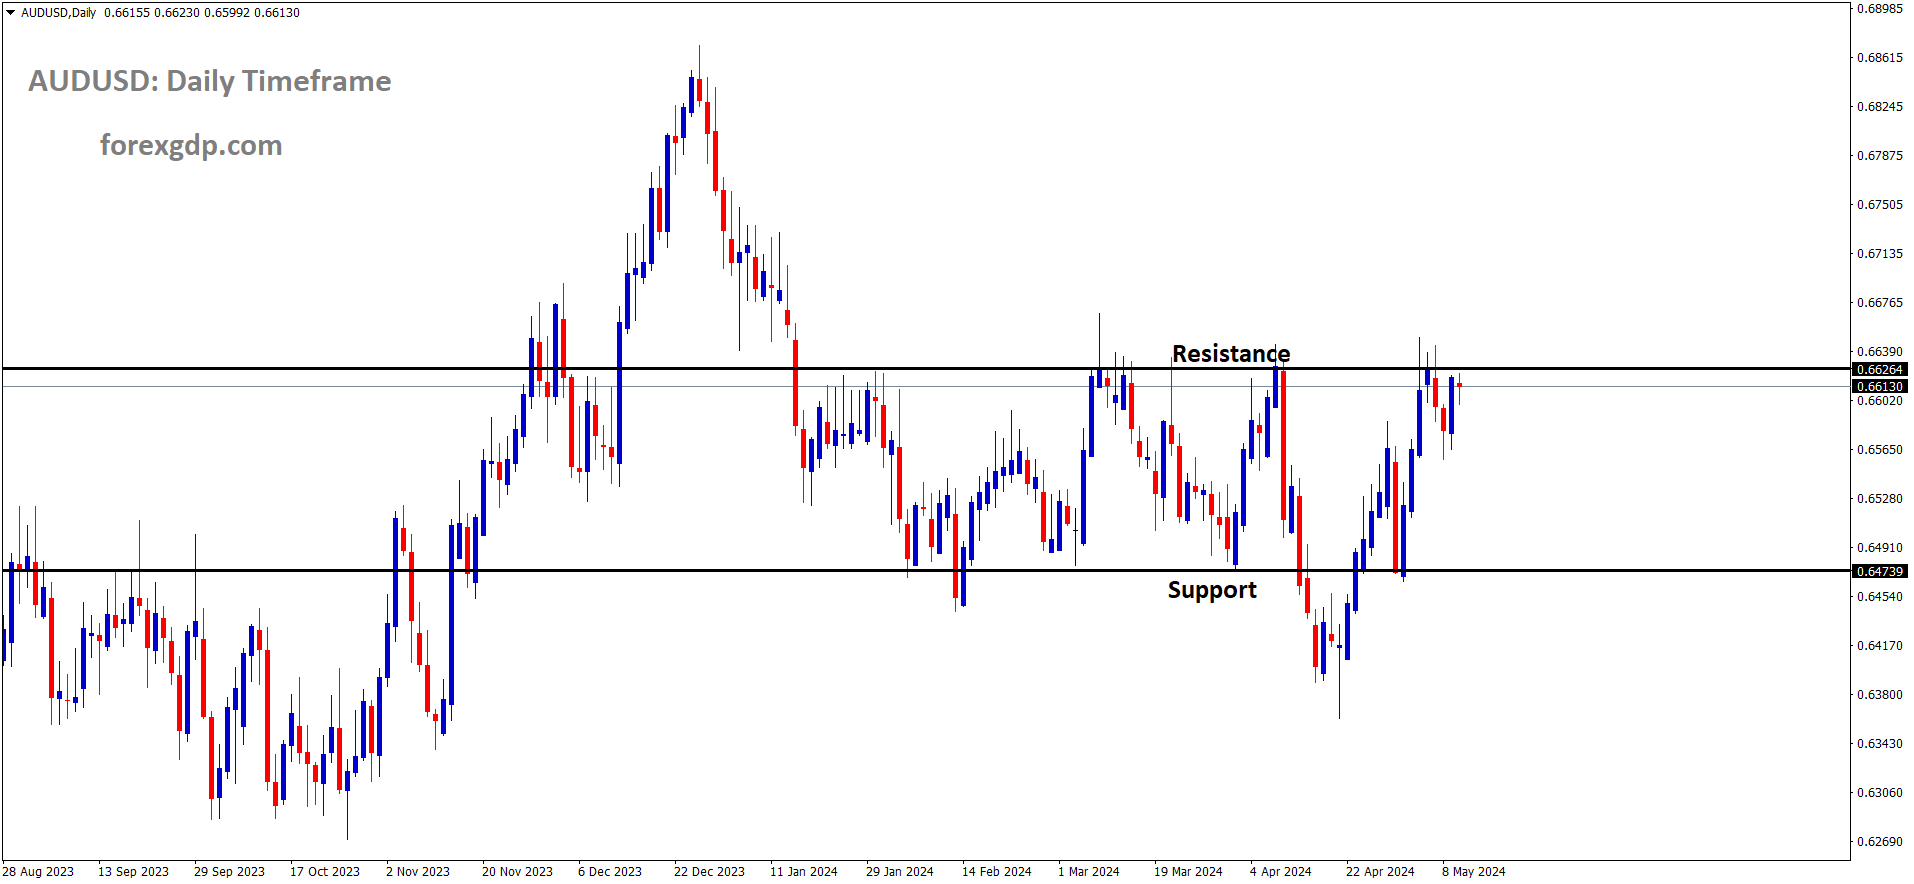 AUDUSD is moving in the Box pattern and the market has reached resistance area of the pattern